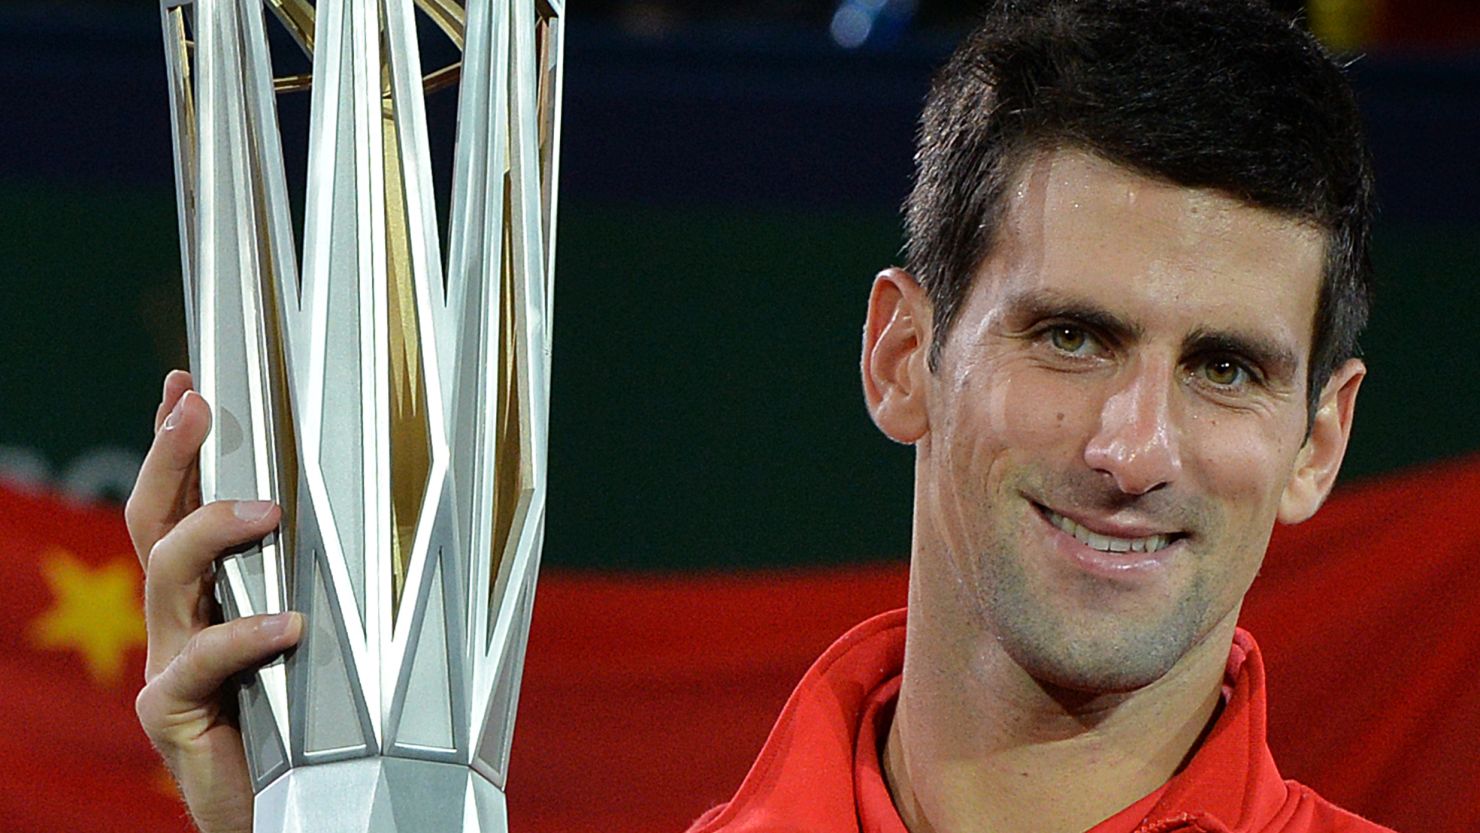 Novak Djokovic gets his hands on the Shanghai Masters trophy again after seeing off Juan Martin Del Potro in the final.